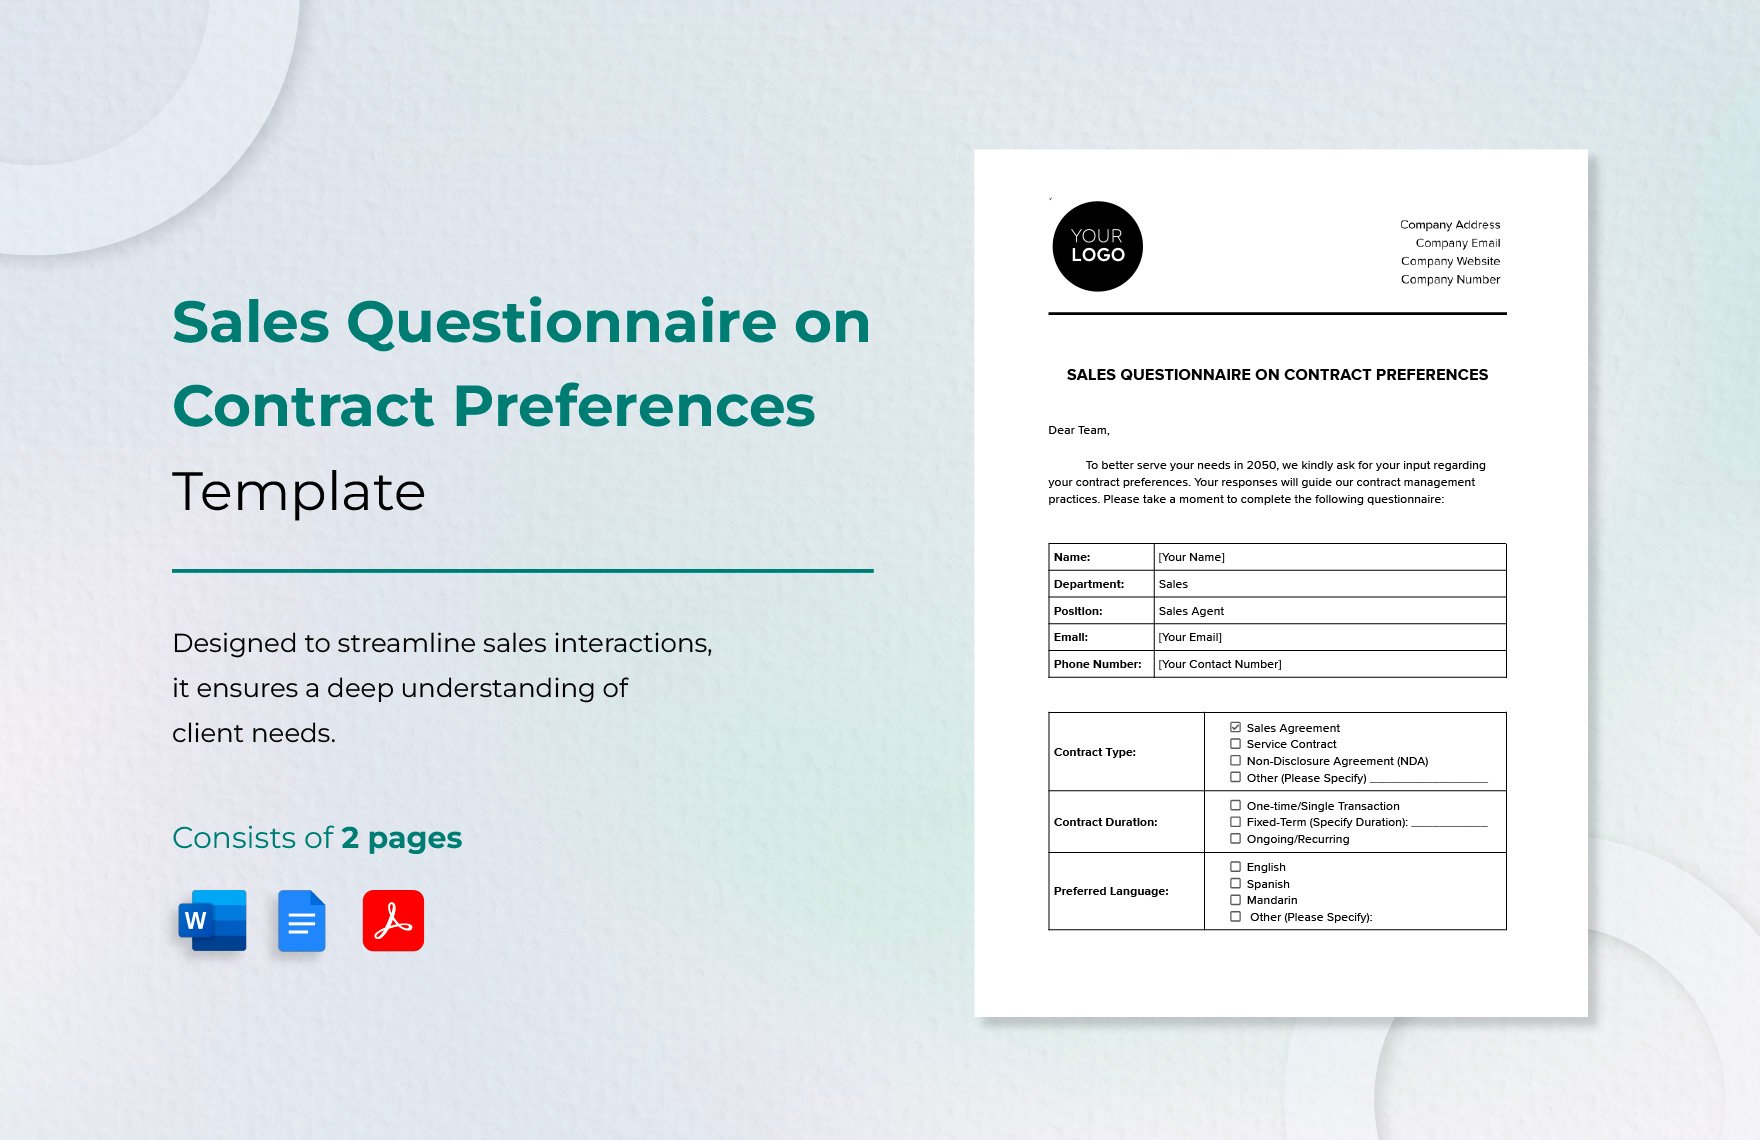 Sales Questionnaire on Contract Preferences Template in Word, Google Docs, PDF